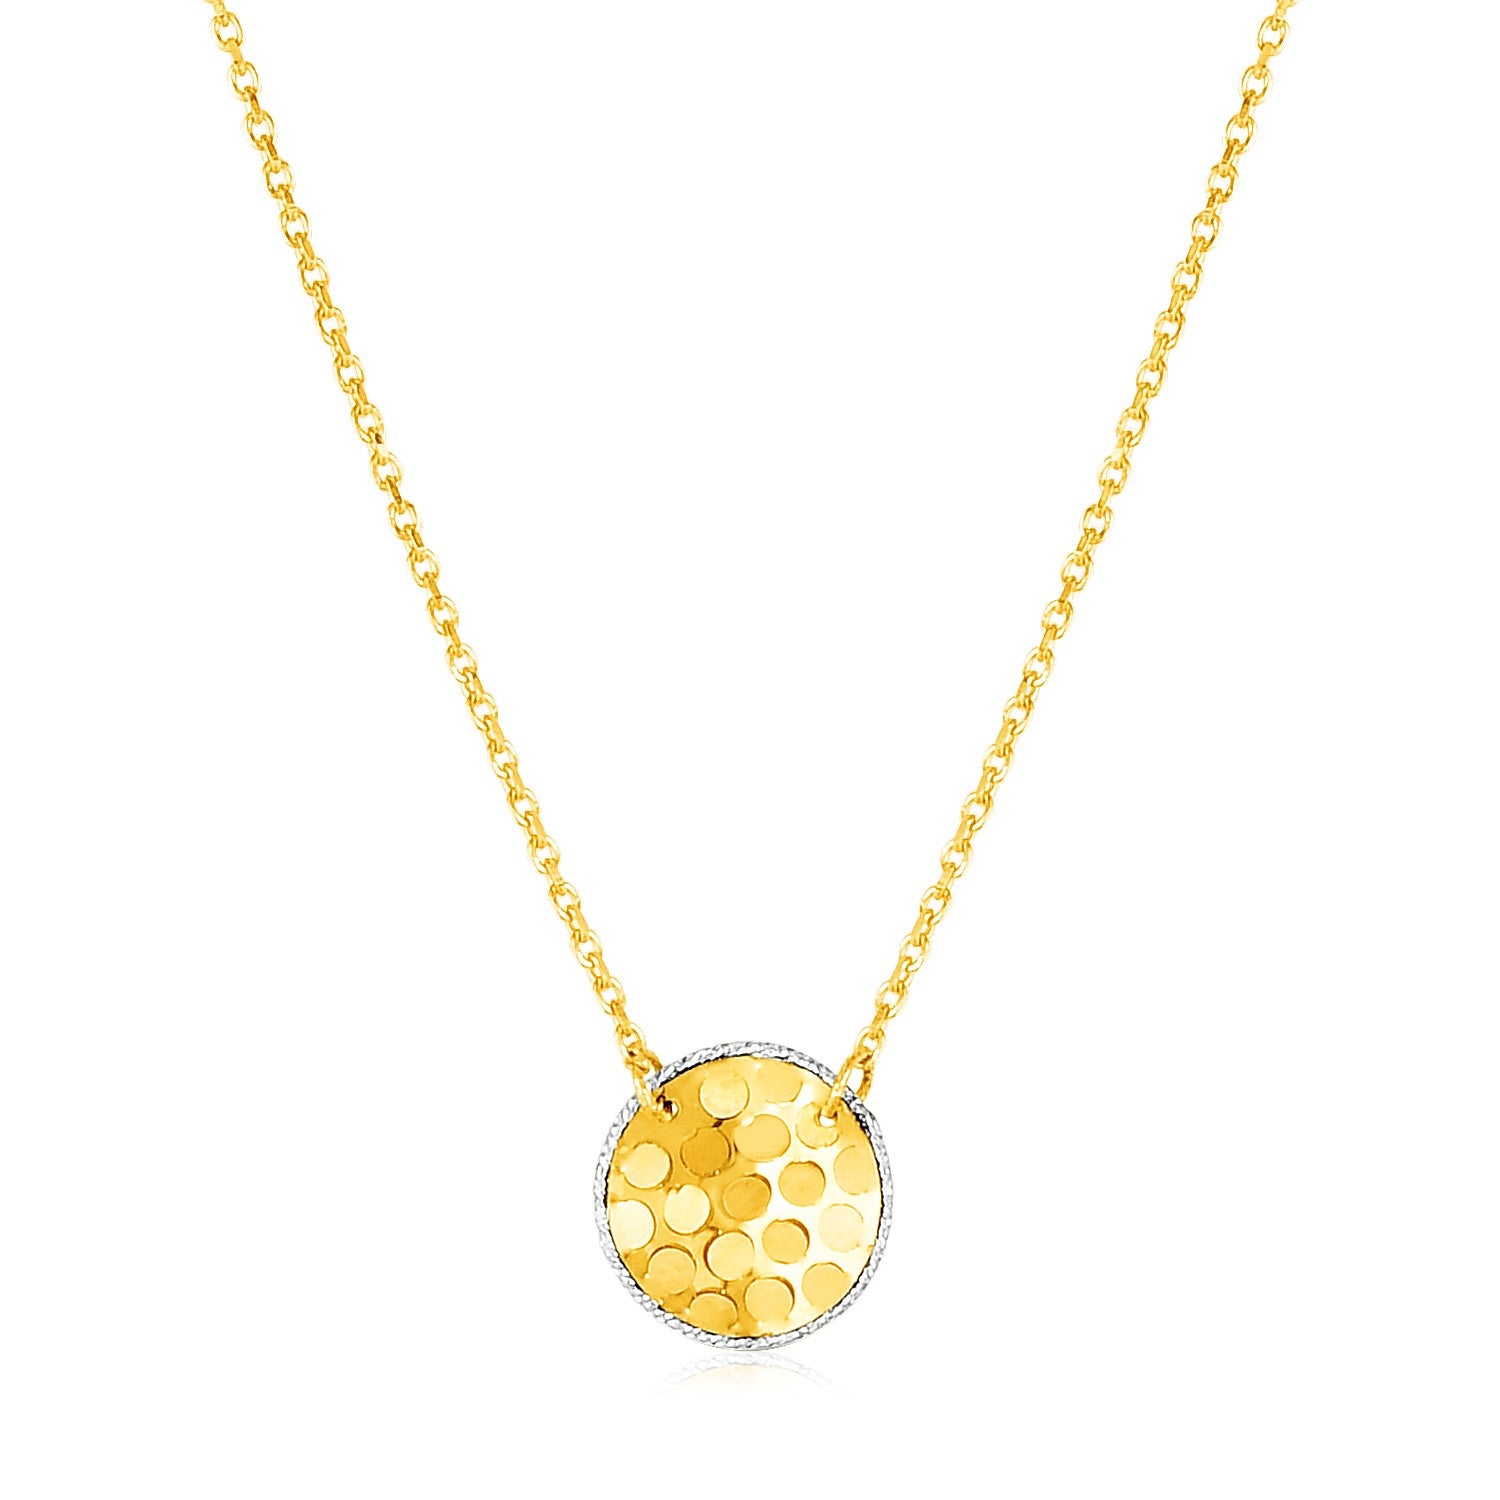 14K Yellow Gold Textured Circle Necklace With White Gold Details 67223-1